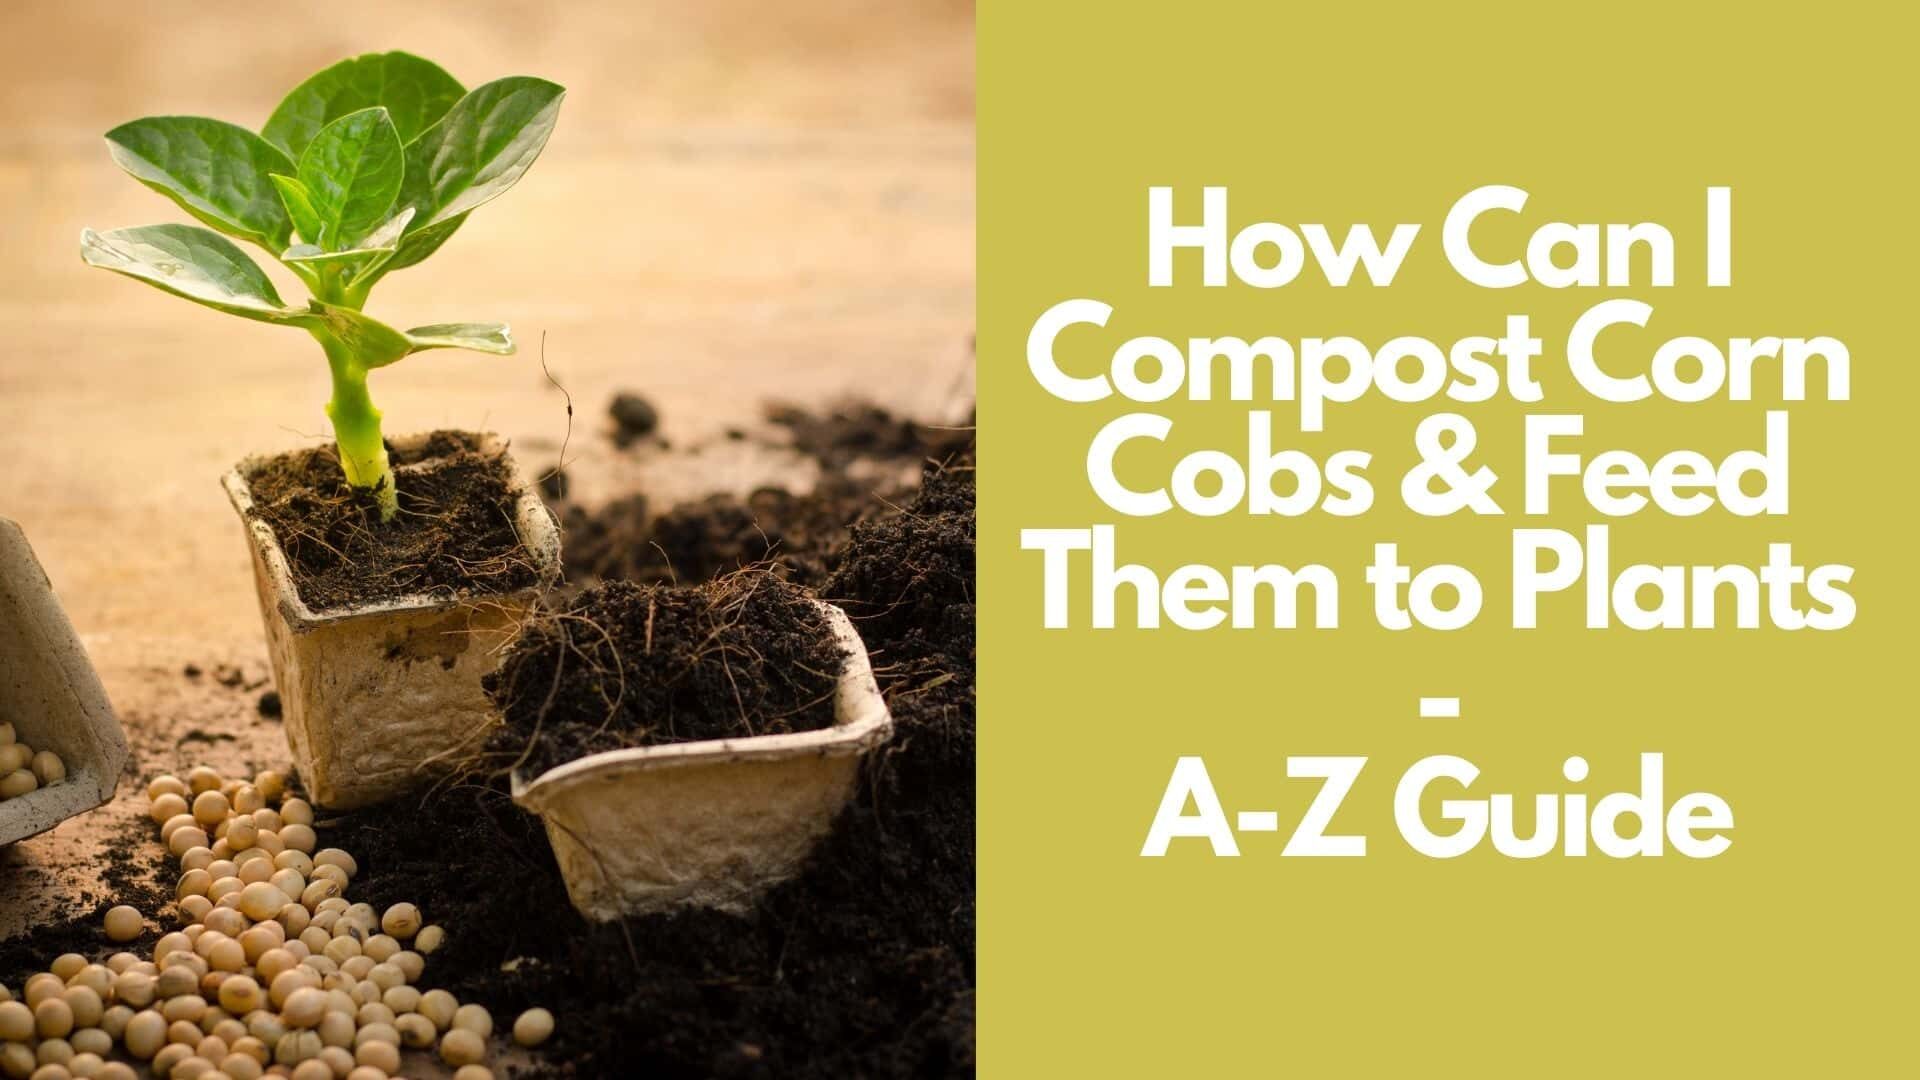 How Can I Compost Corn Cobs & Feed Them to Plants| A-Z Guide 